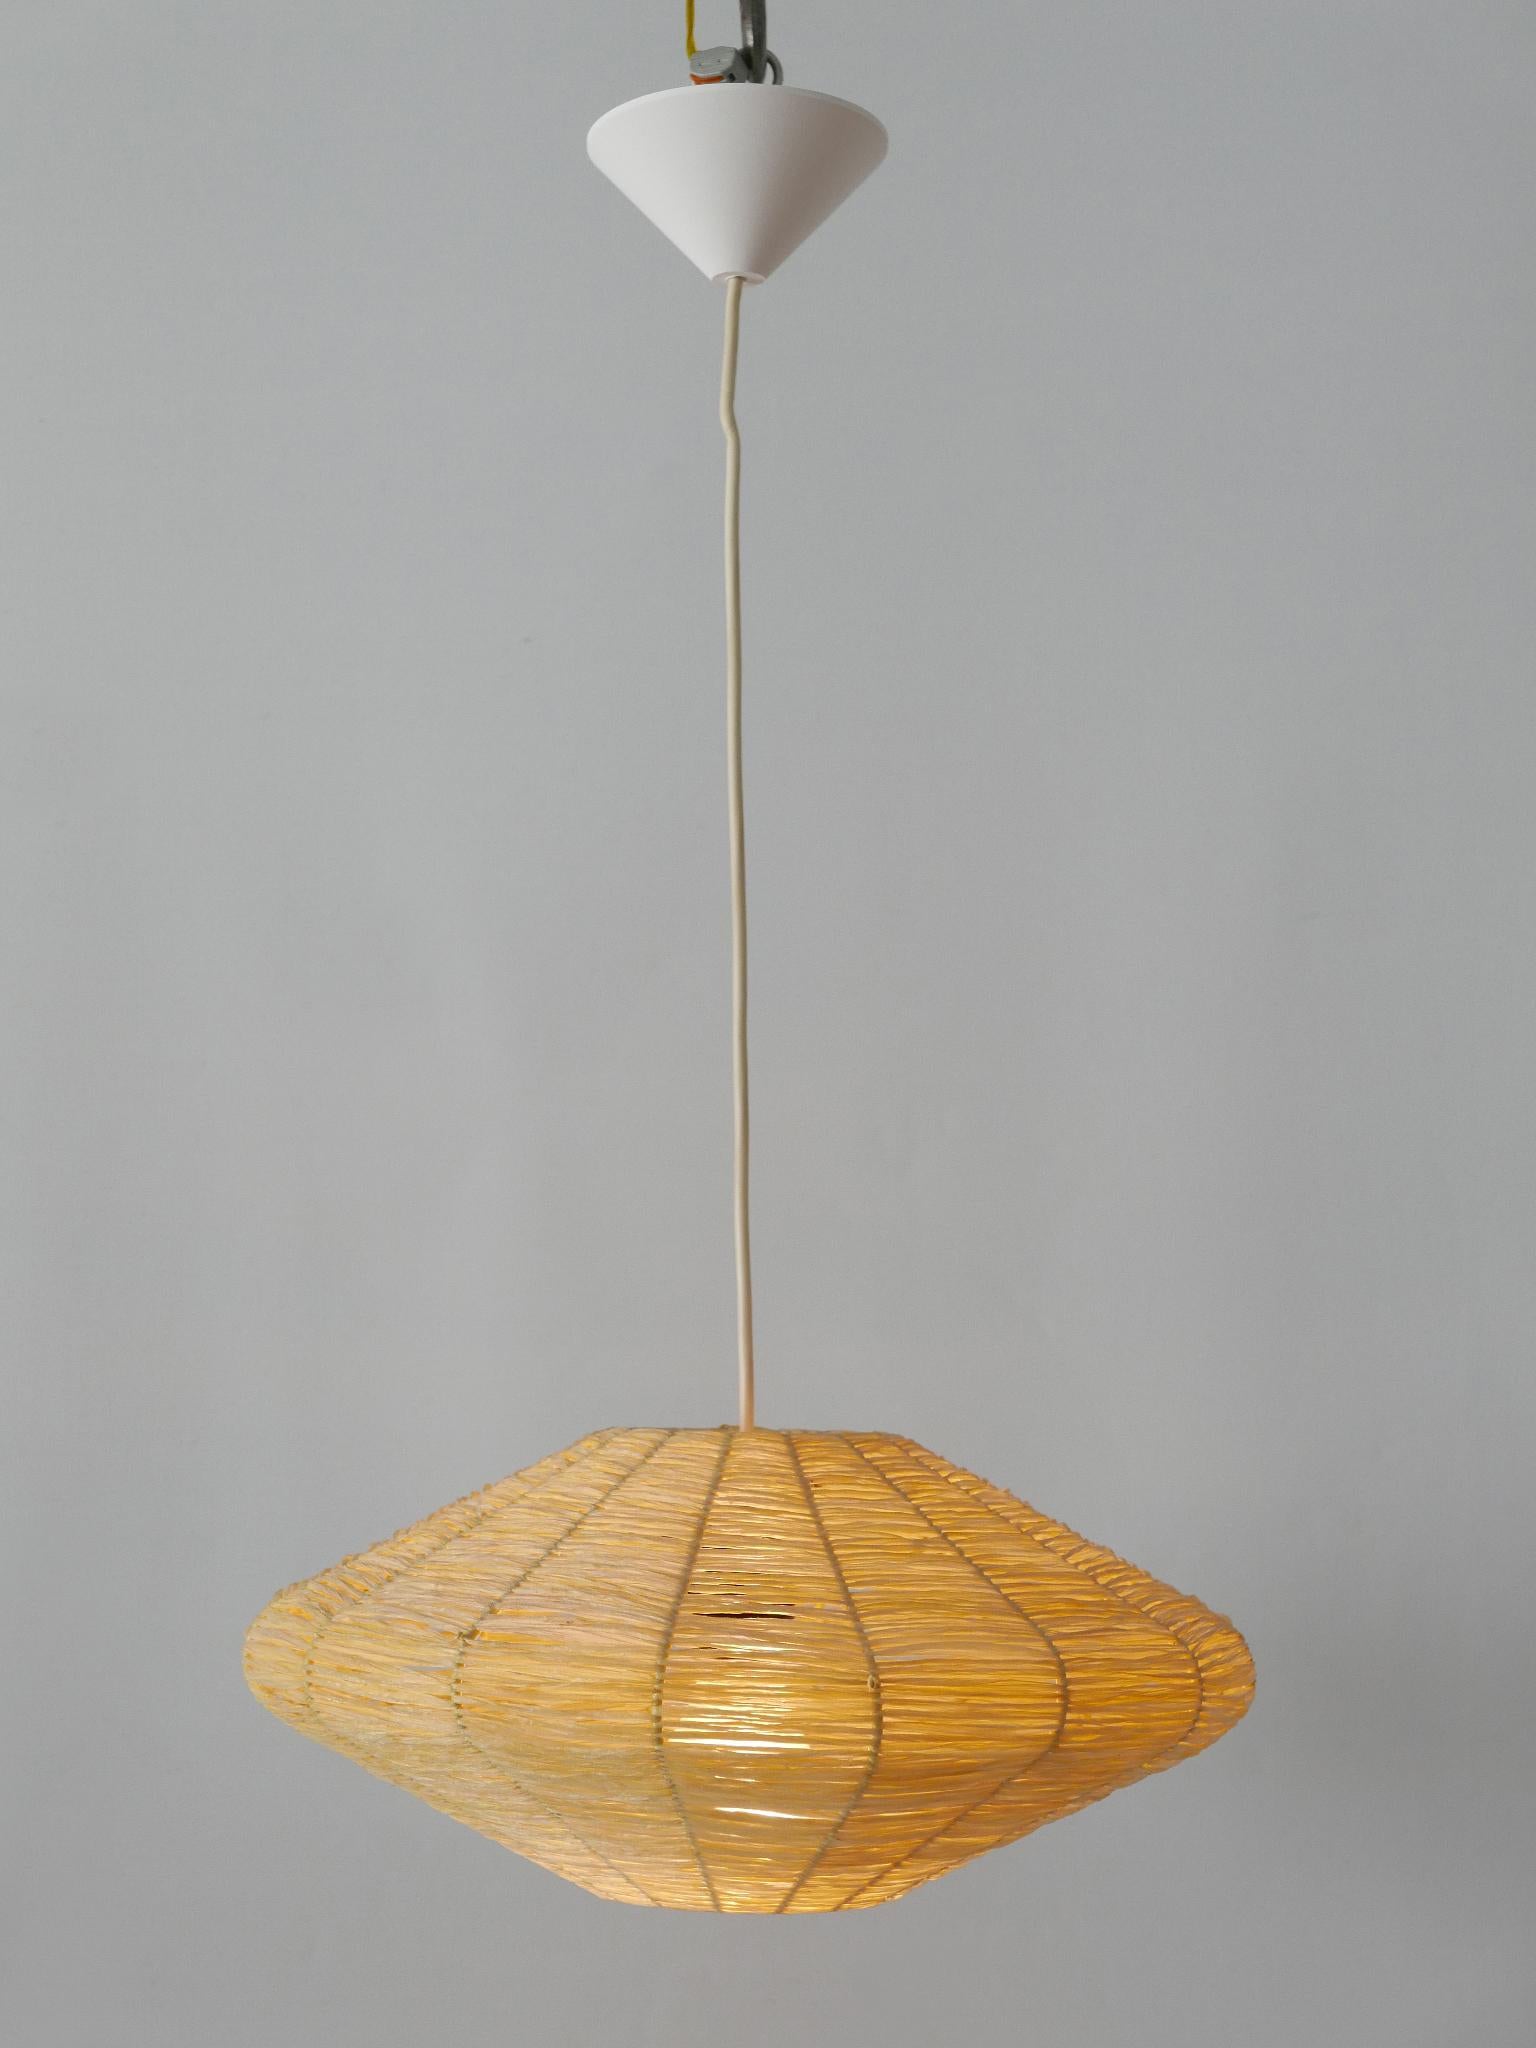 Rare Mid-Century Modern Raffia Bast Pendant Lamp or Hanging Light Germany 1970s In Good Condition For Sale In Munich, DE